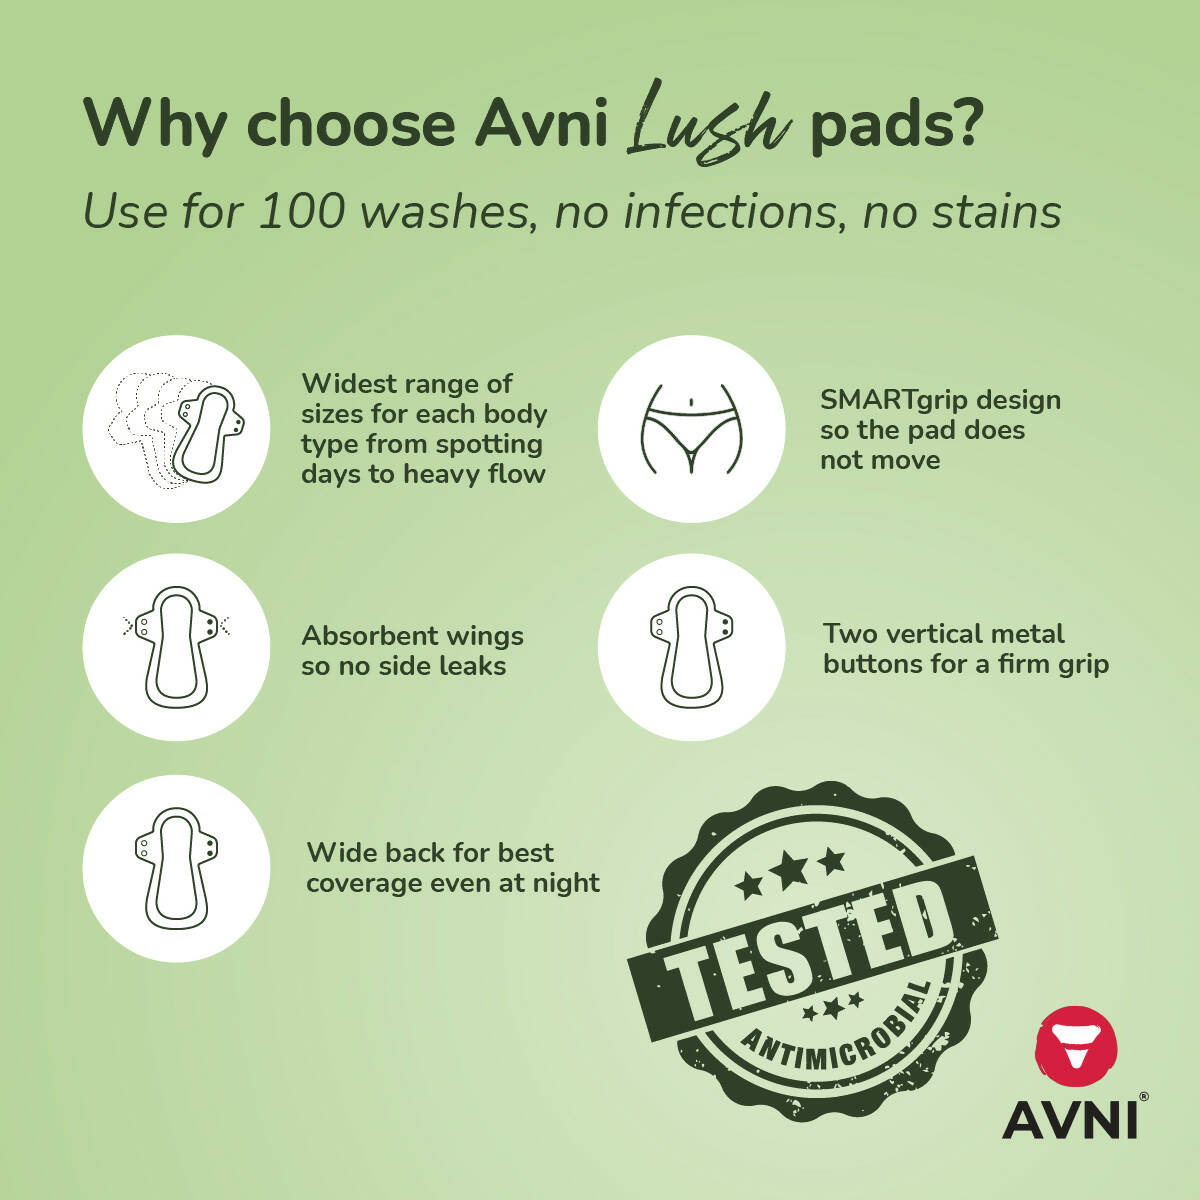 Avni Lush Certified 100% Organic Cotton Washable Cloth Pads, Large Size (L-280MM, Pack of 2) | Antimicrobial Reusable Cloth Sanitary Pad | With Cloth Storage pouch Wemy Store